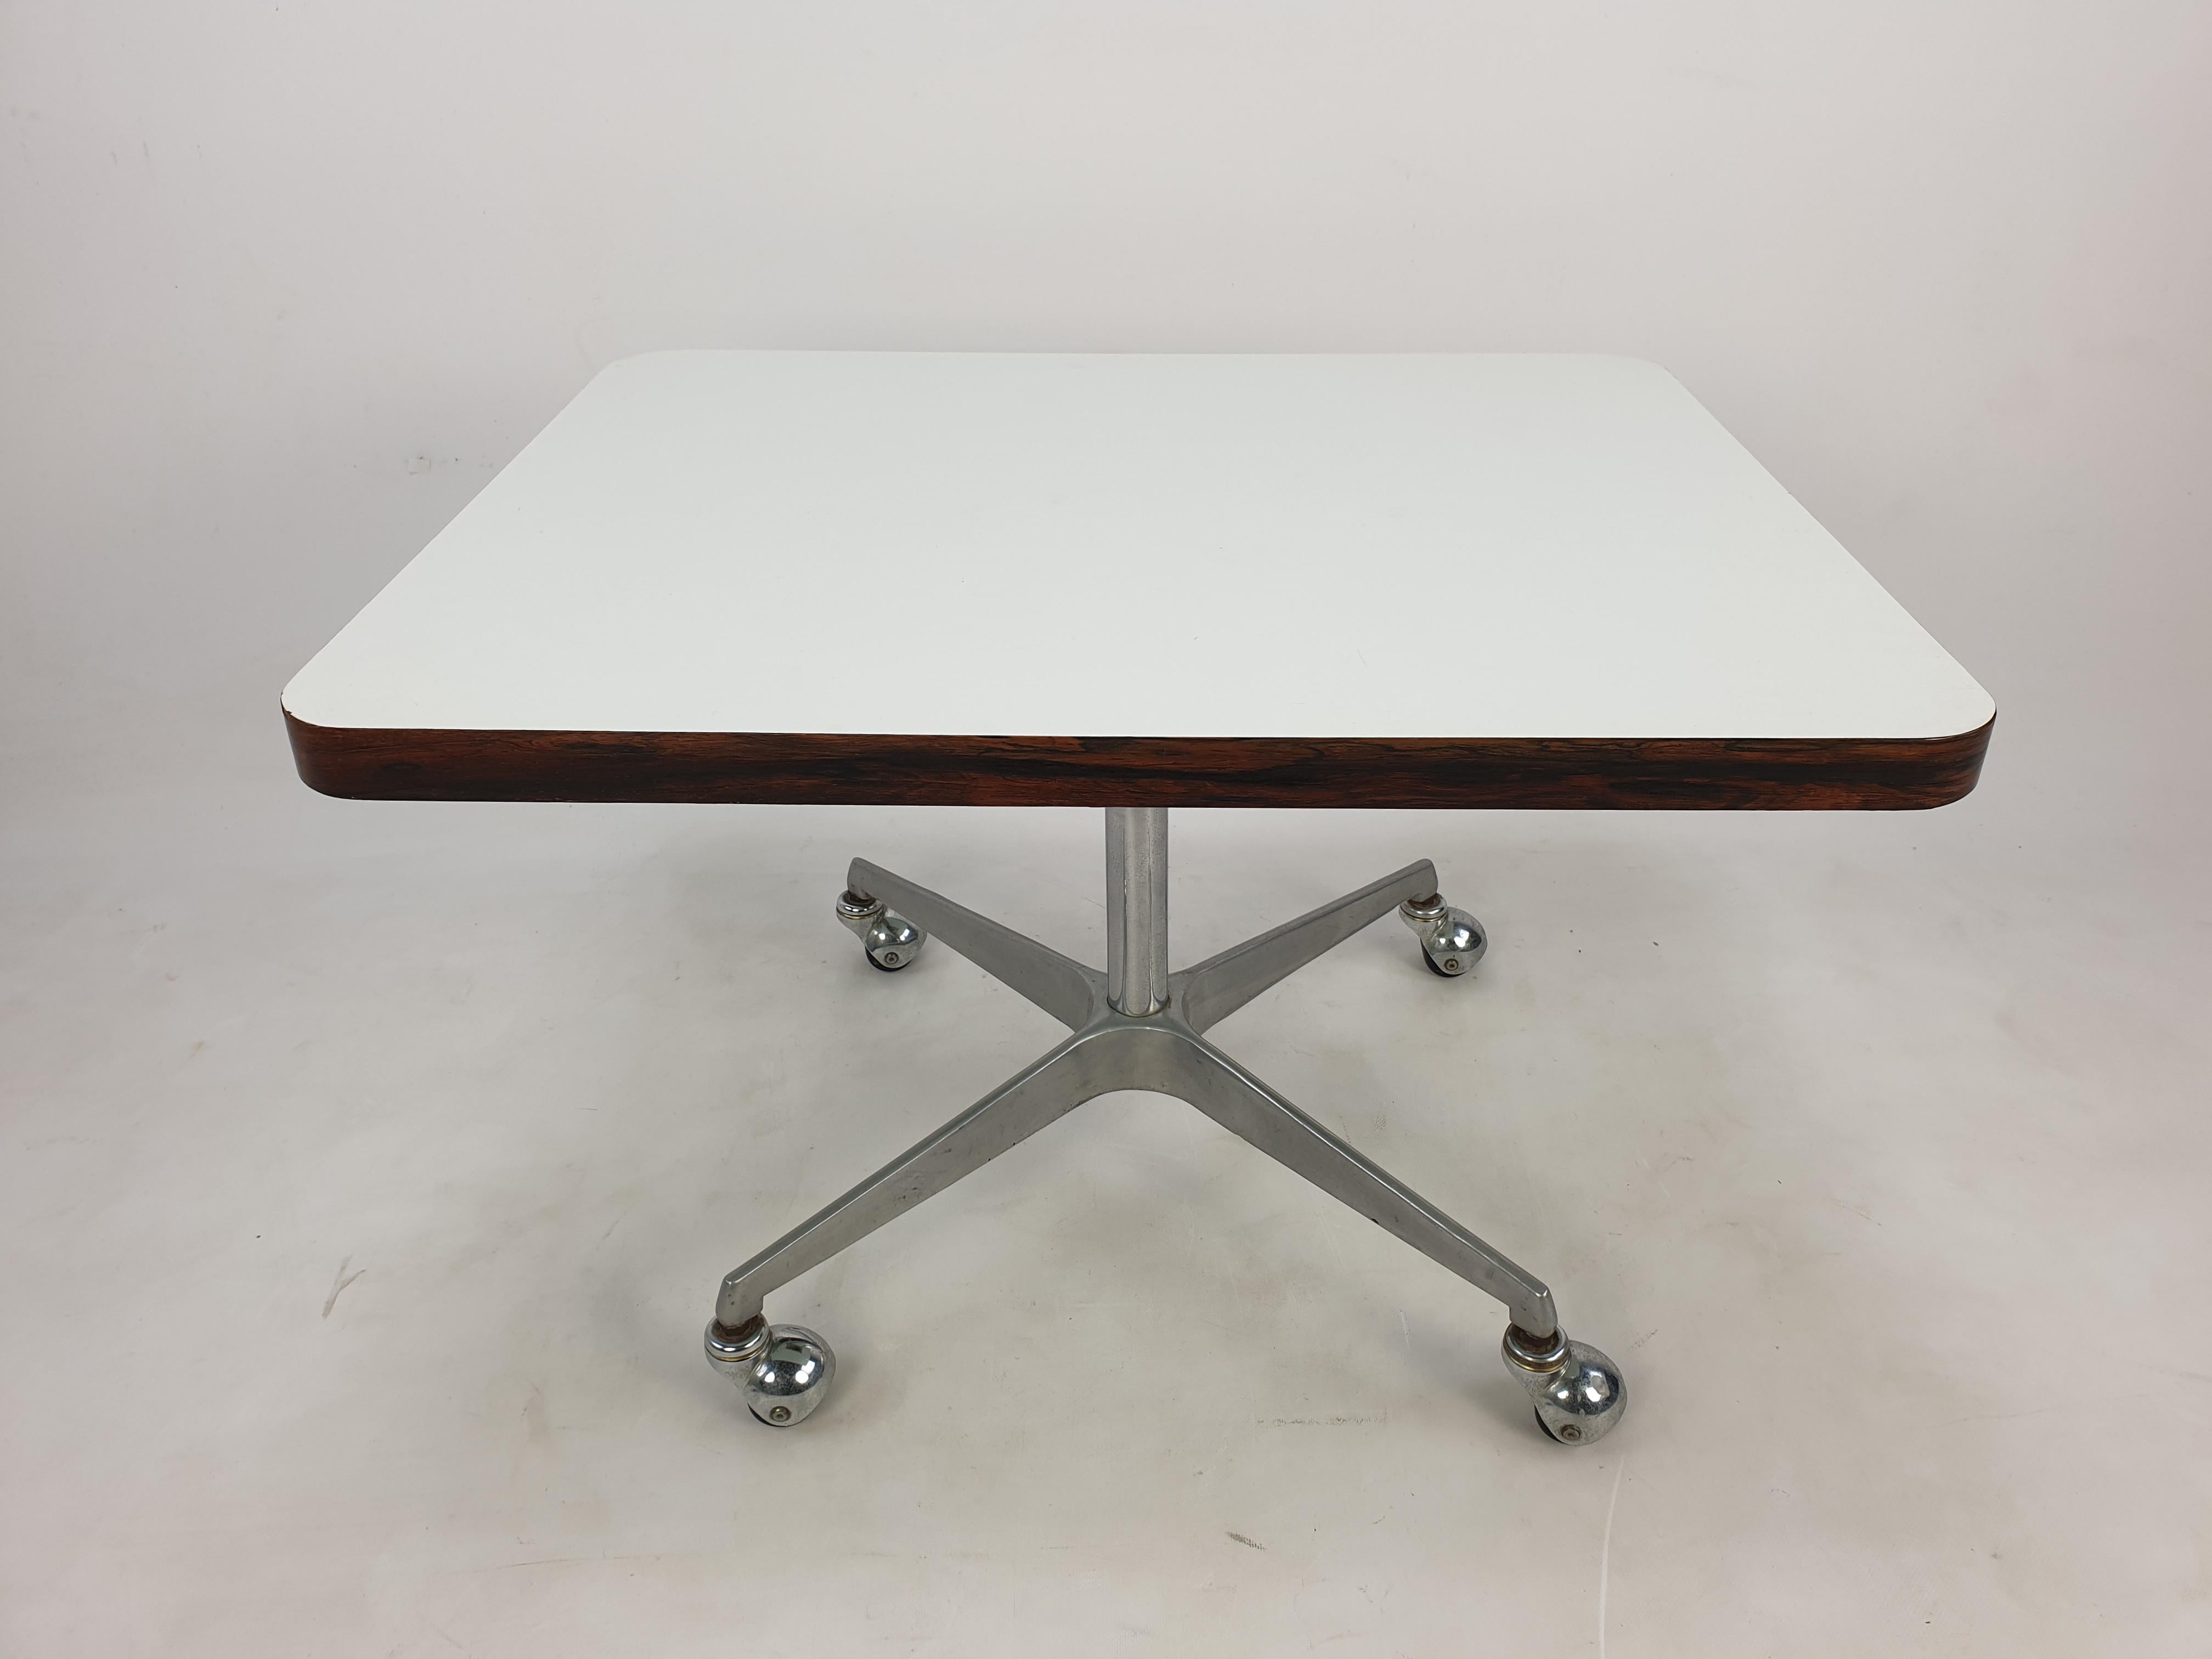 Very nice side table or coffee table, fabricated by Artifort in the 70's.

4 wheels with a metal structure and a wooden laminated plate.
This solid and high quality table is made with the best materials. 

The wooden laminated plate is in very good